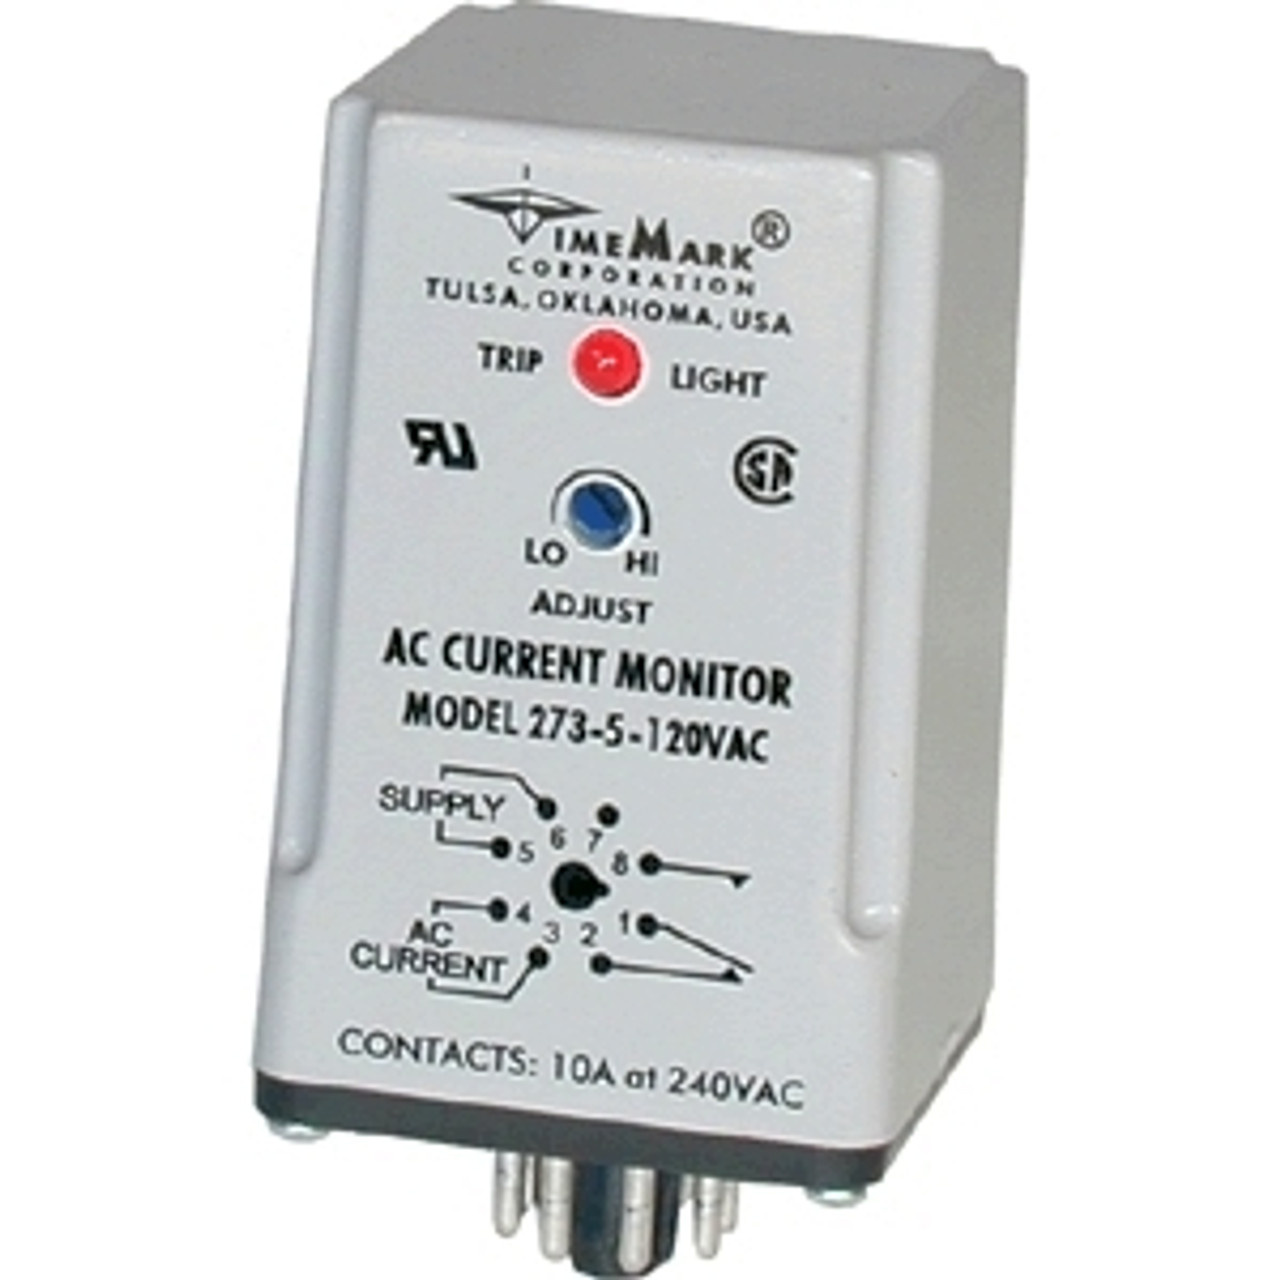 TimeMark 273-10-120 Current Monitor Relays